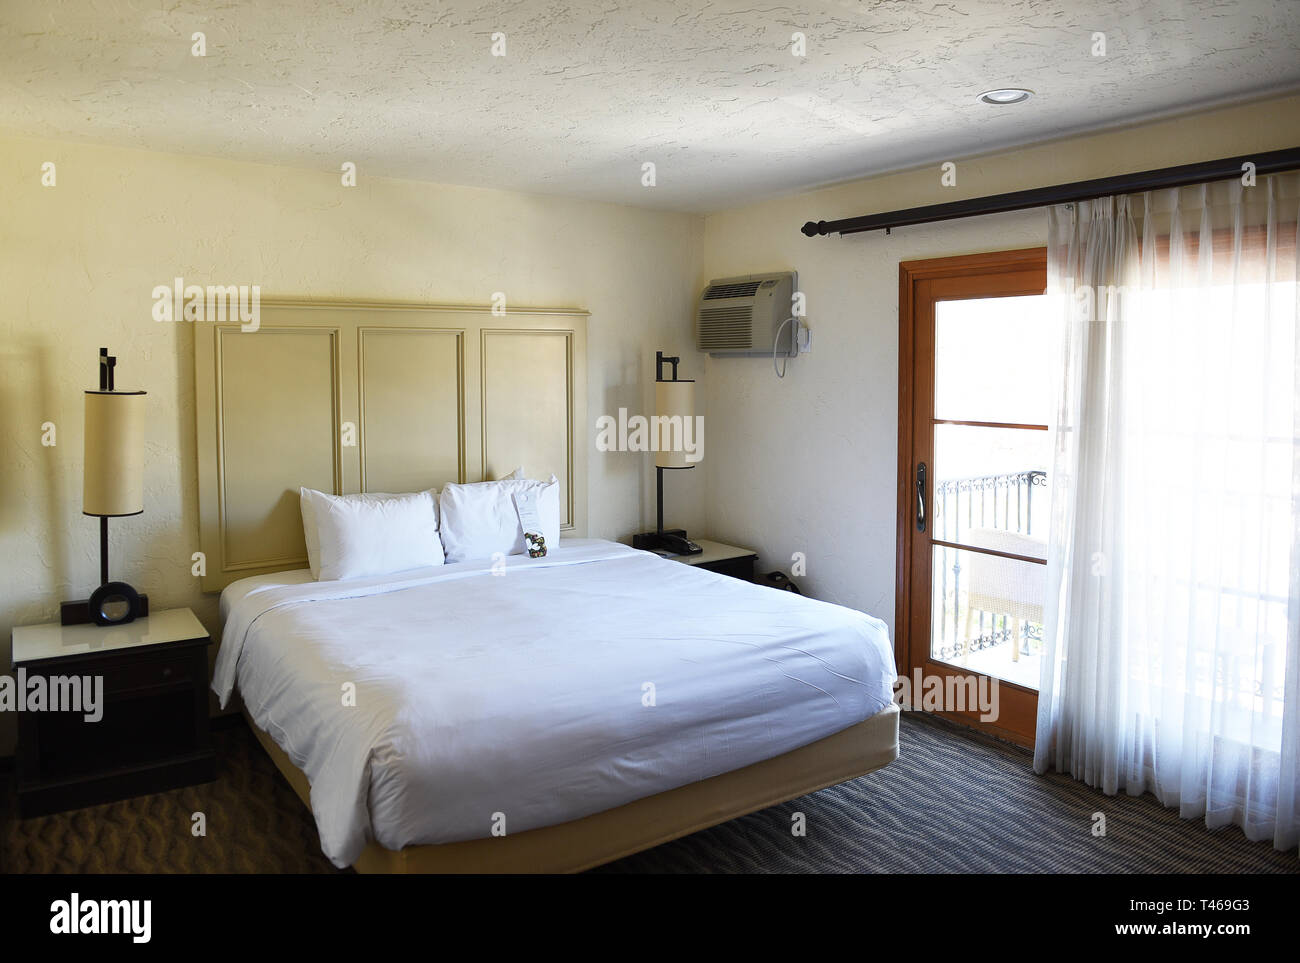 SANTA BARBARA, CALIFORNIA - APRIL 11, 2019: Hyatt Centric Hotel guest room. Across from East Beach, built  in the 1930s Spanish Colonial style, only 1 Stock Photo